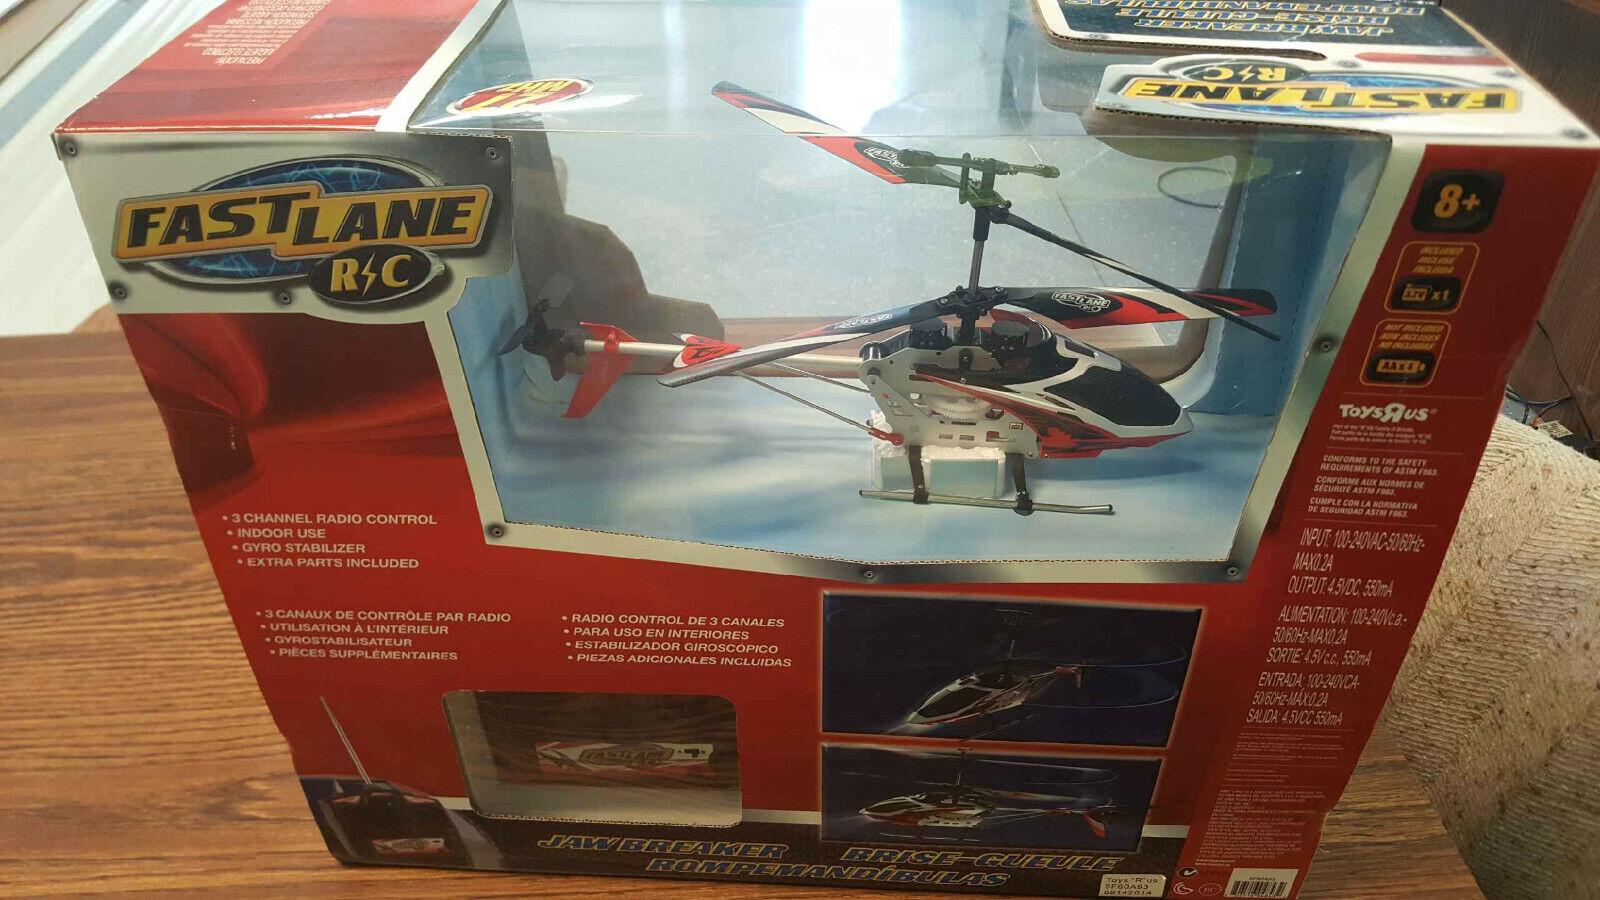 Fast Lane Rc Helicopter: Proper maintenance tips for fast lane RC helicopter